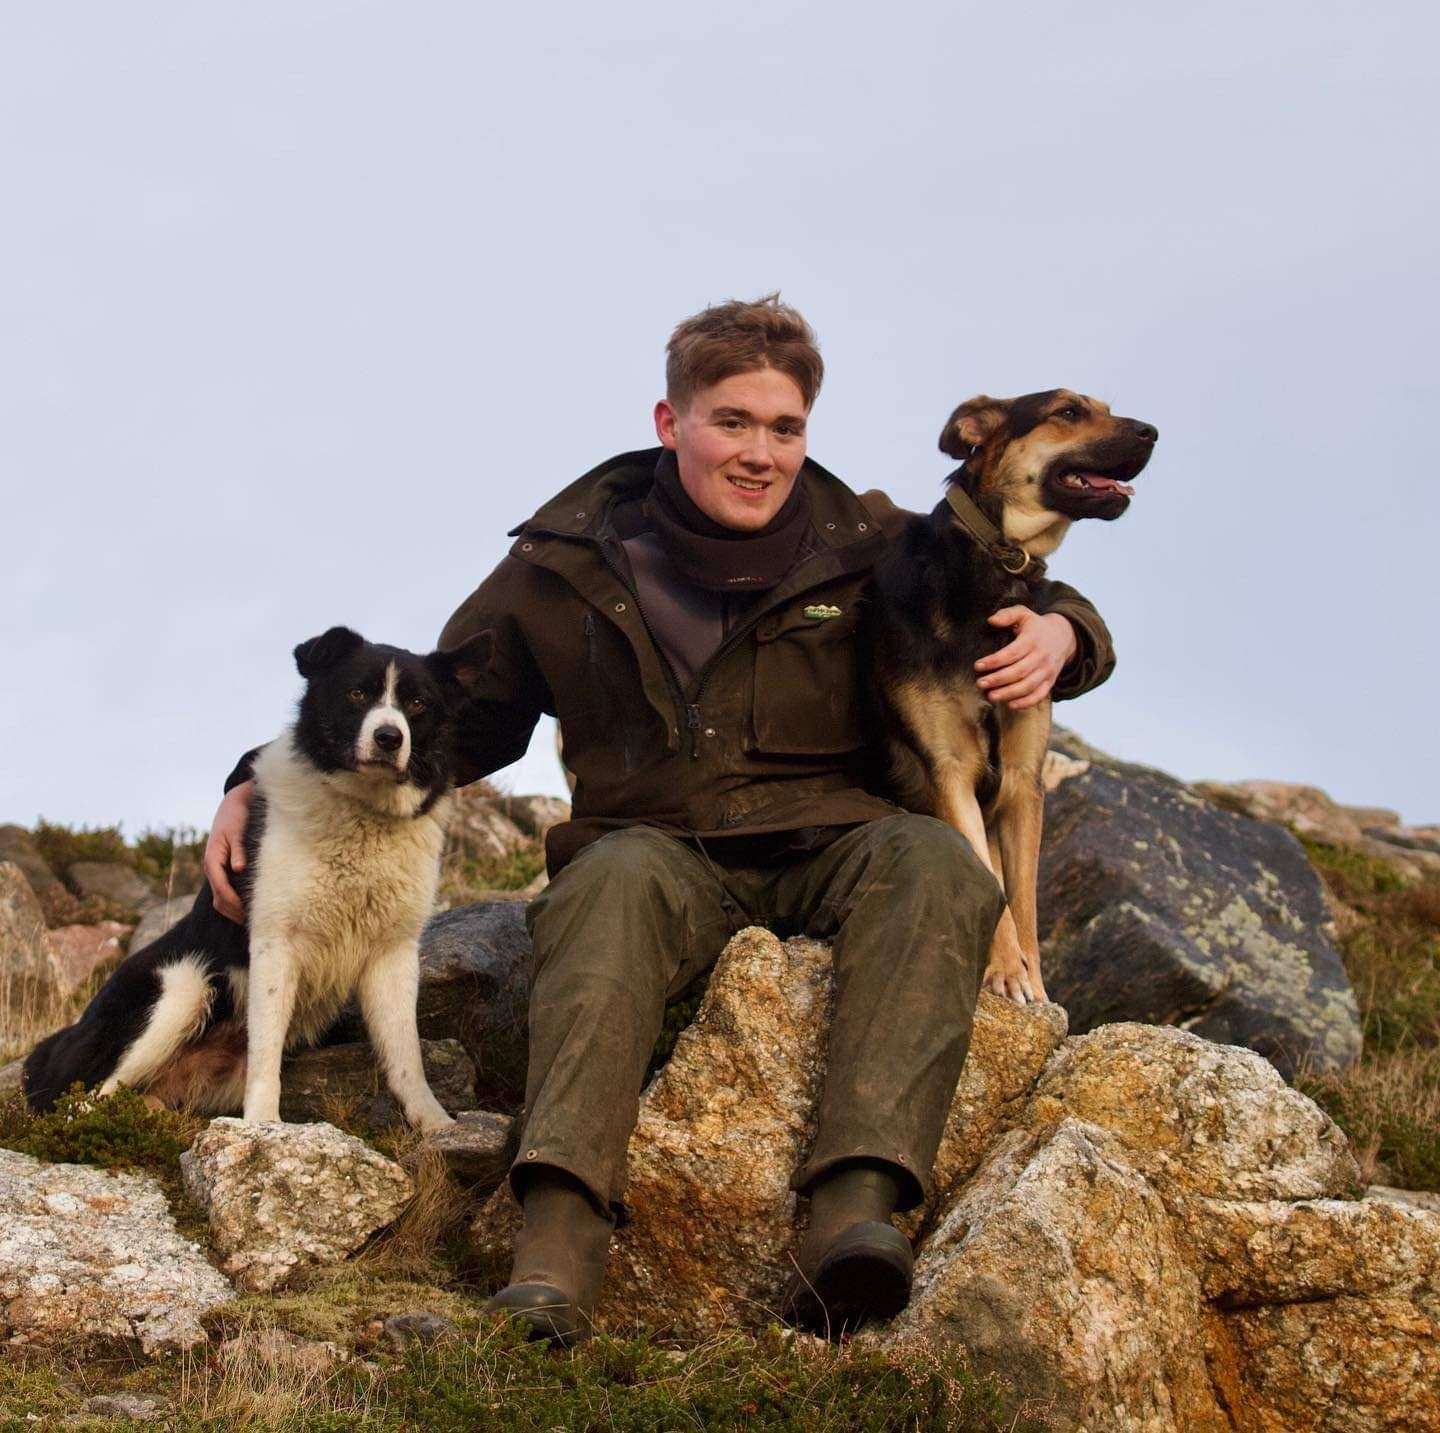 High achiever: Mure Grant at his aunt Joyce Campbell’s Armadale farm with dogs Fred and Ruby.